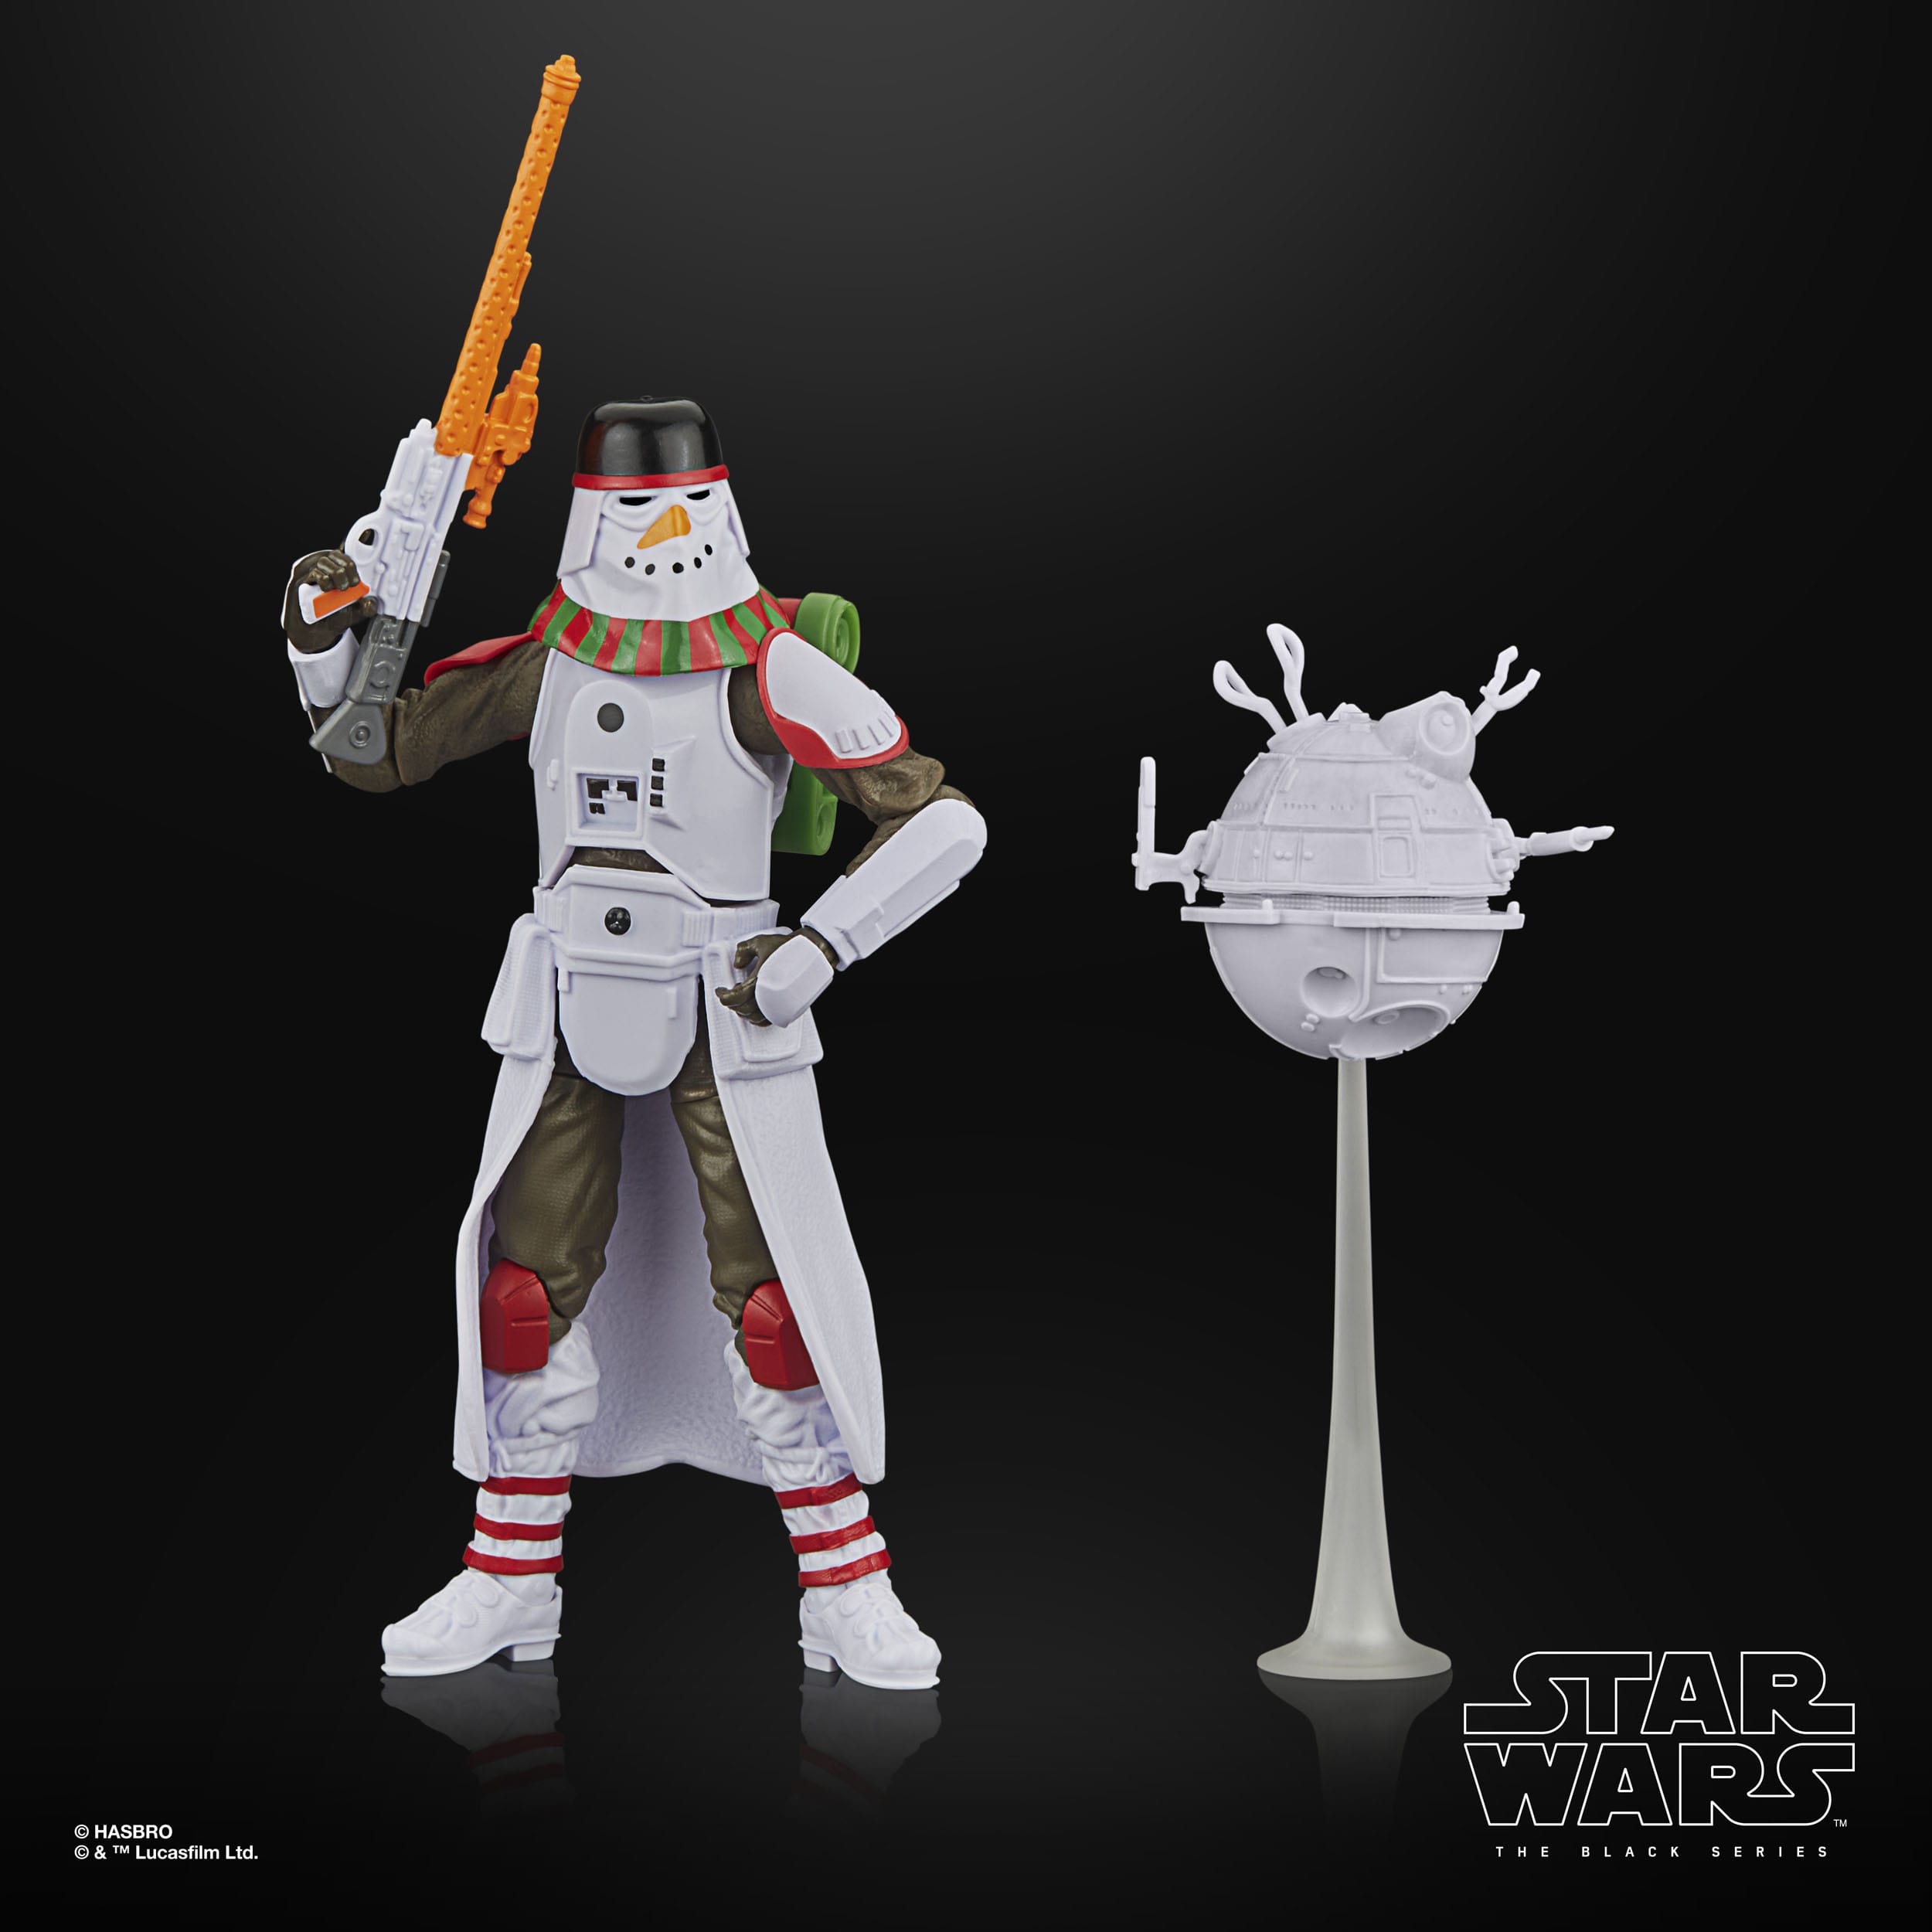 Star Wars Black Series Actionfigur Snowtrooper (Holiday Edition) 15 cm F83345L0 5010996179944